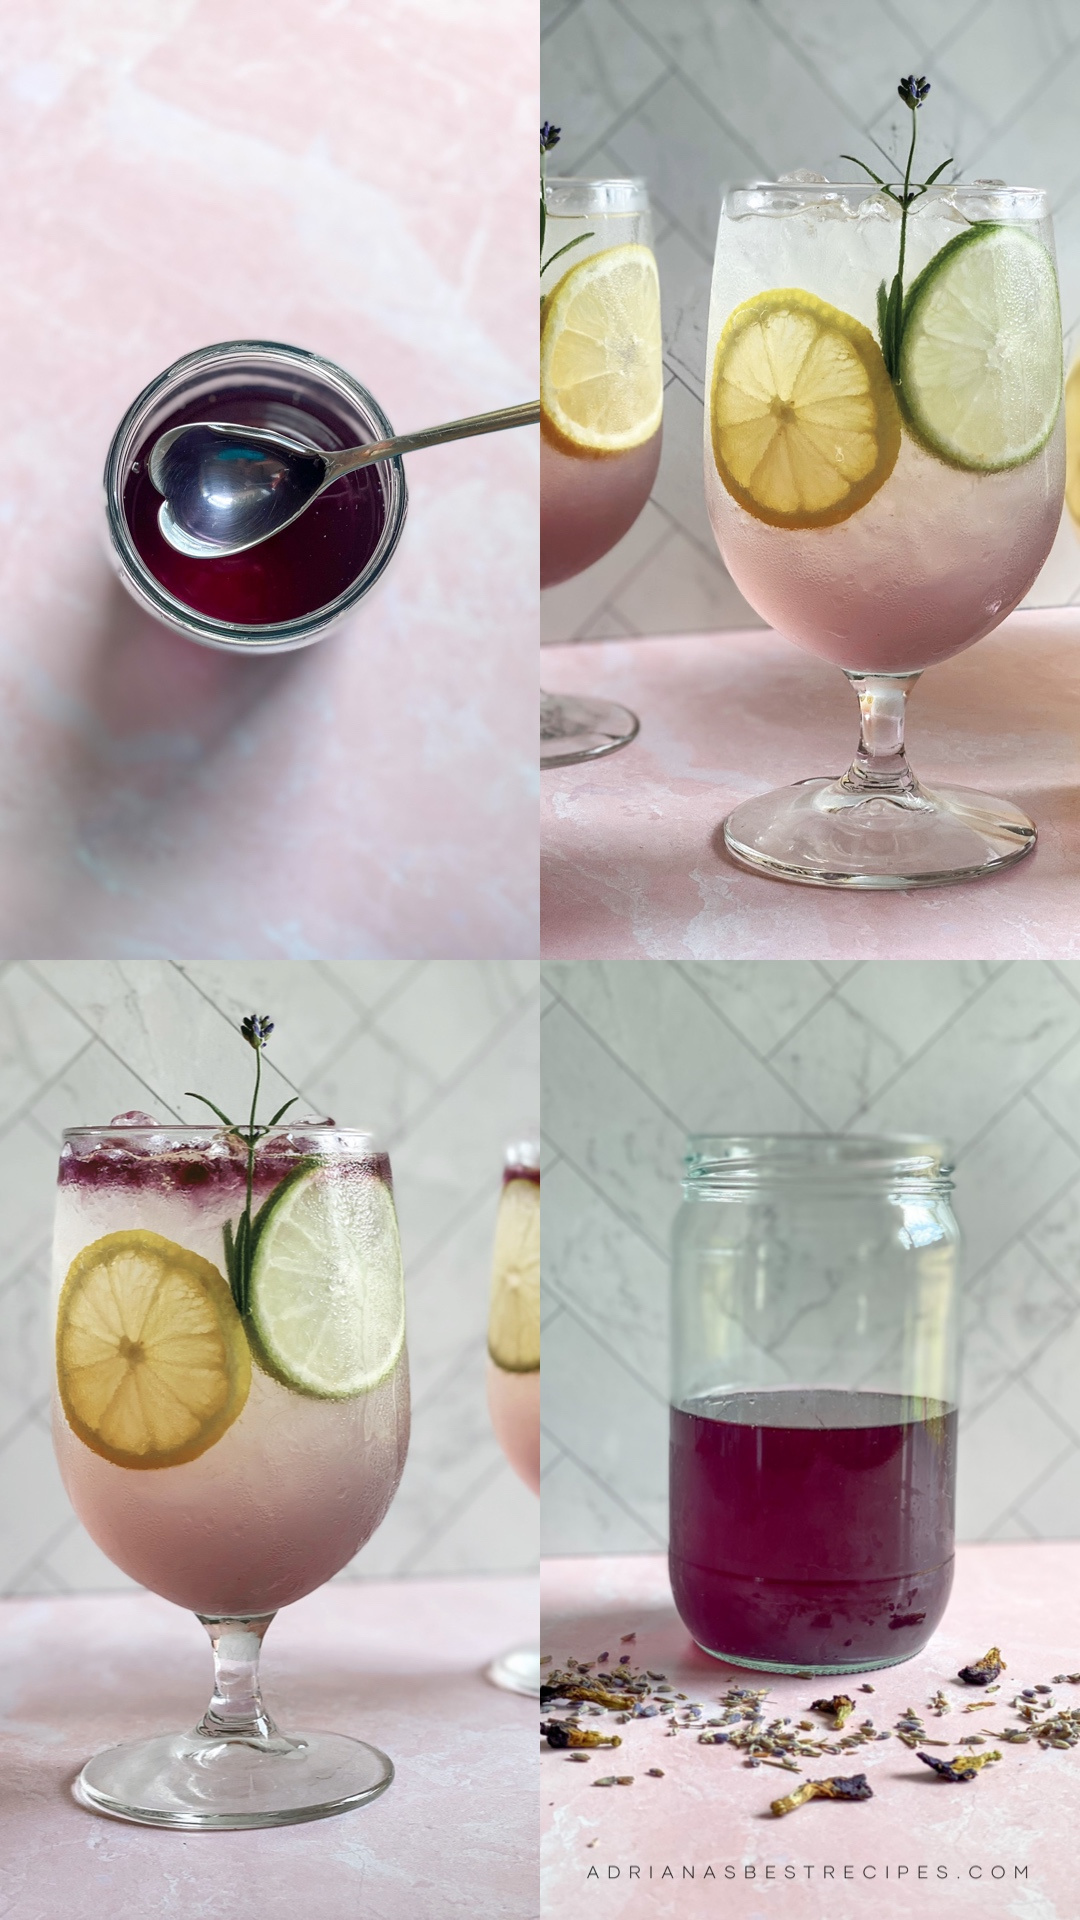 A collage showing how to use the lavender syrup and the blue tea in lemonades